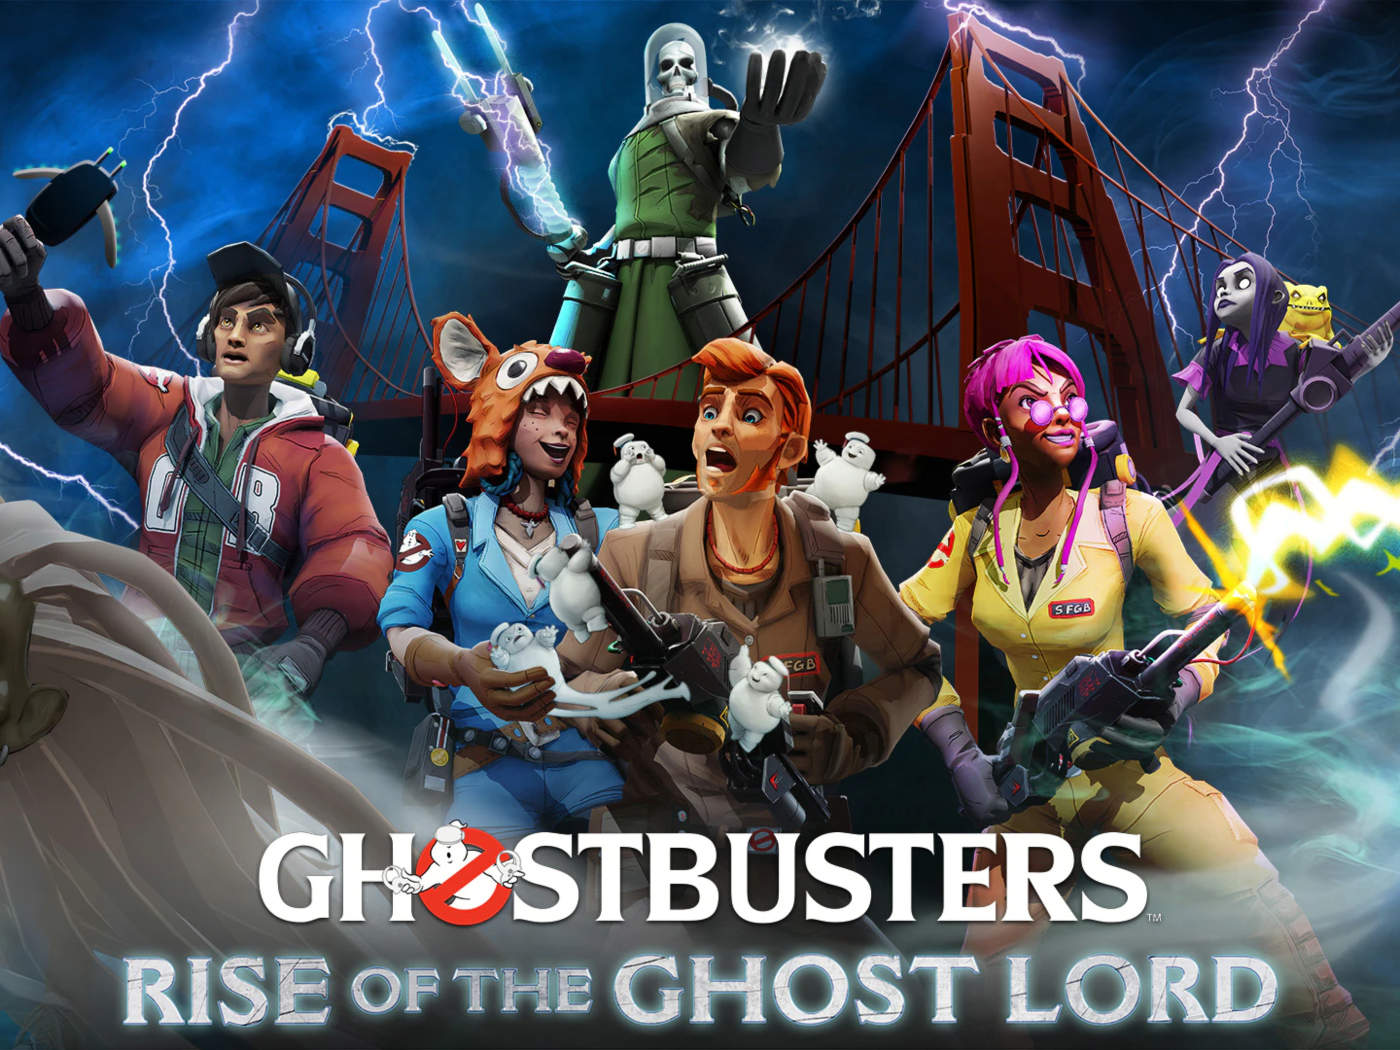 Ghostbusters: Rise of the Ghost Lord VR Game Introduction